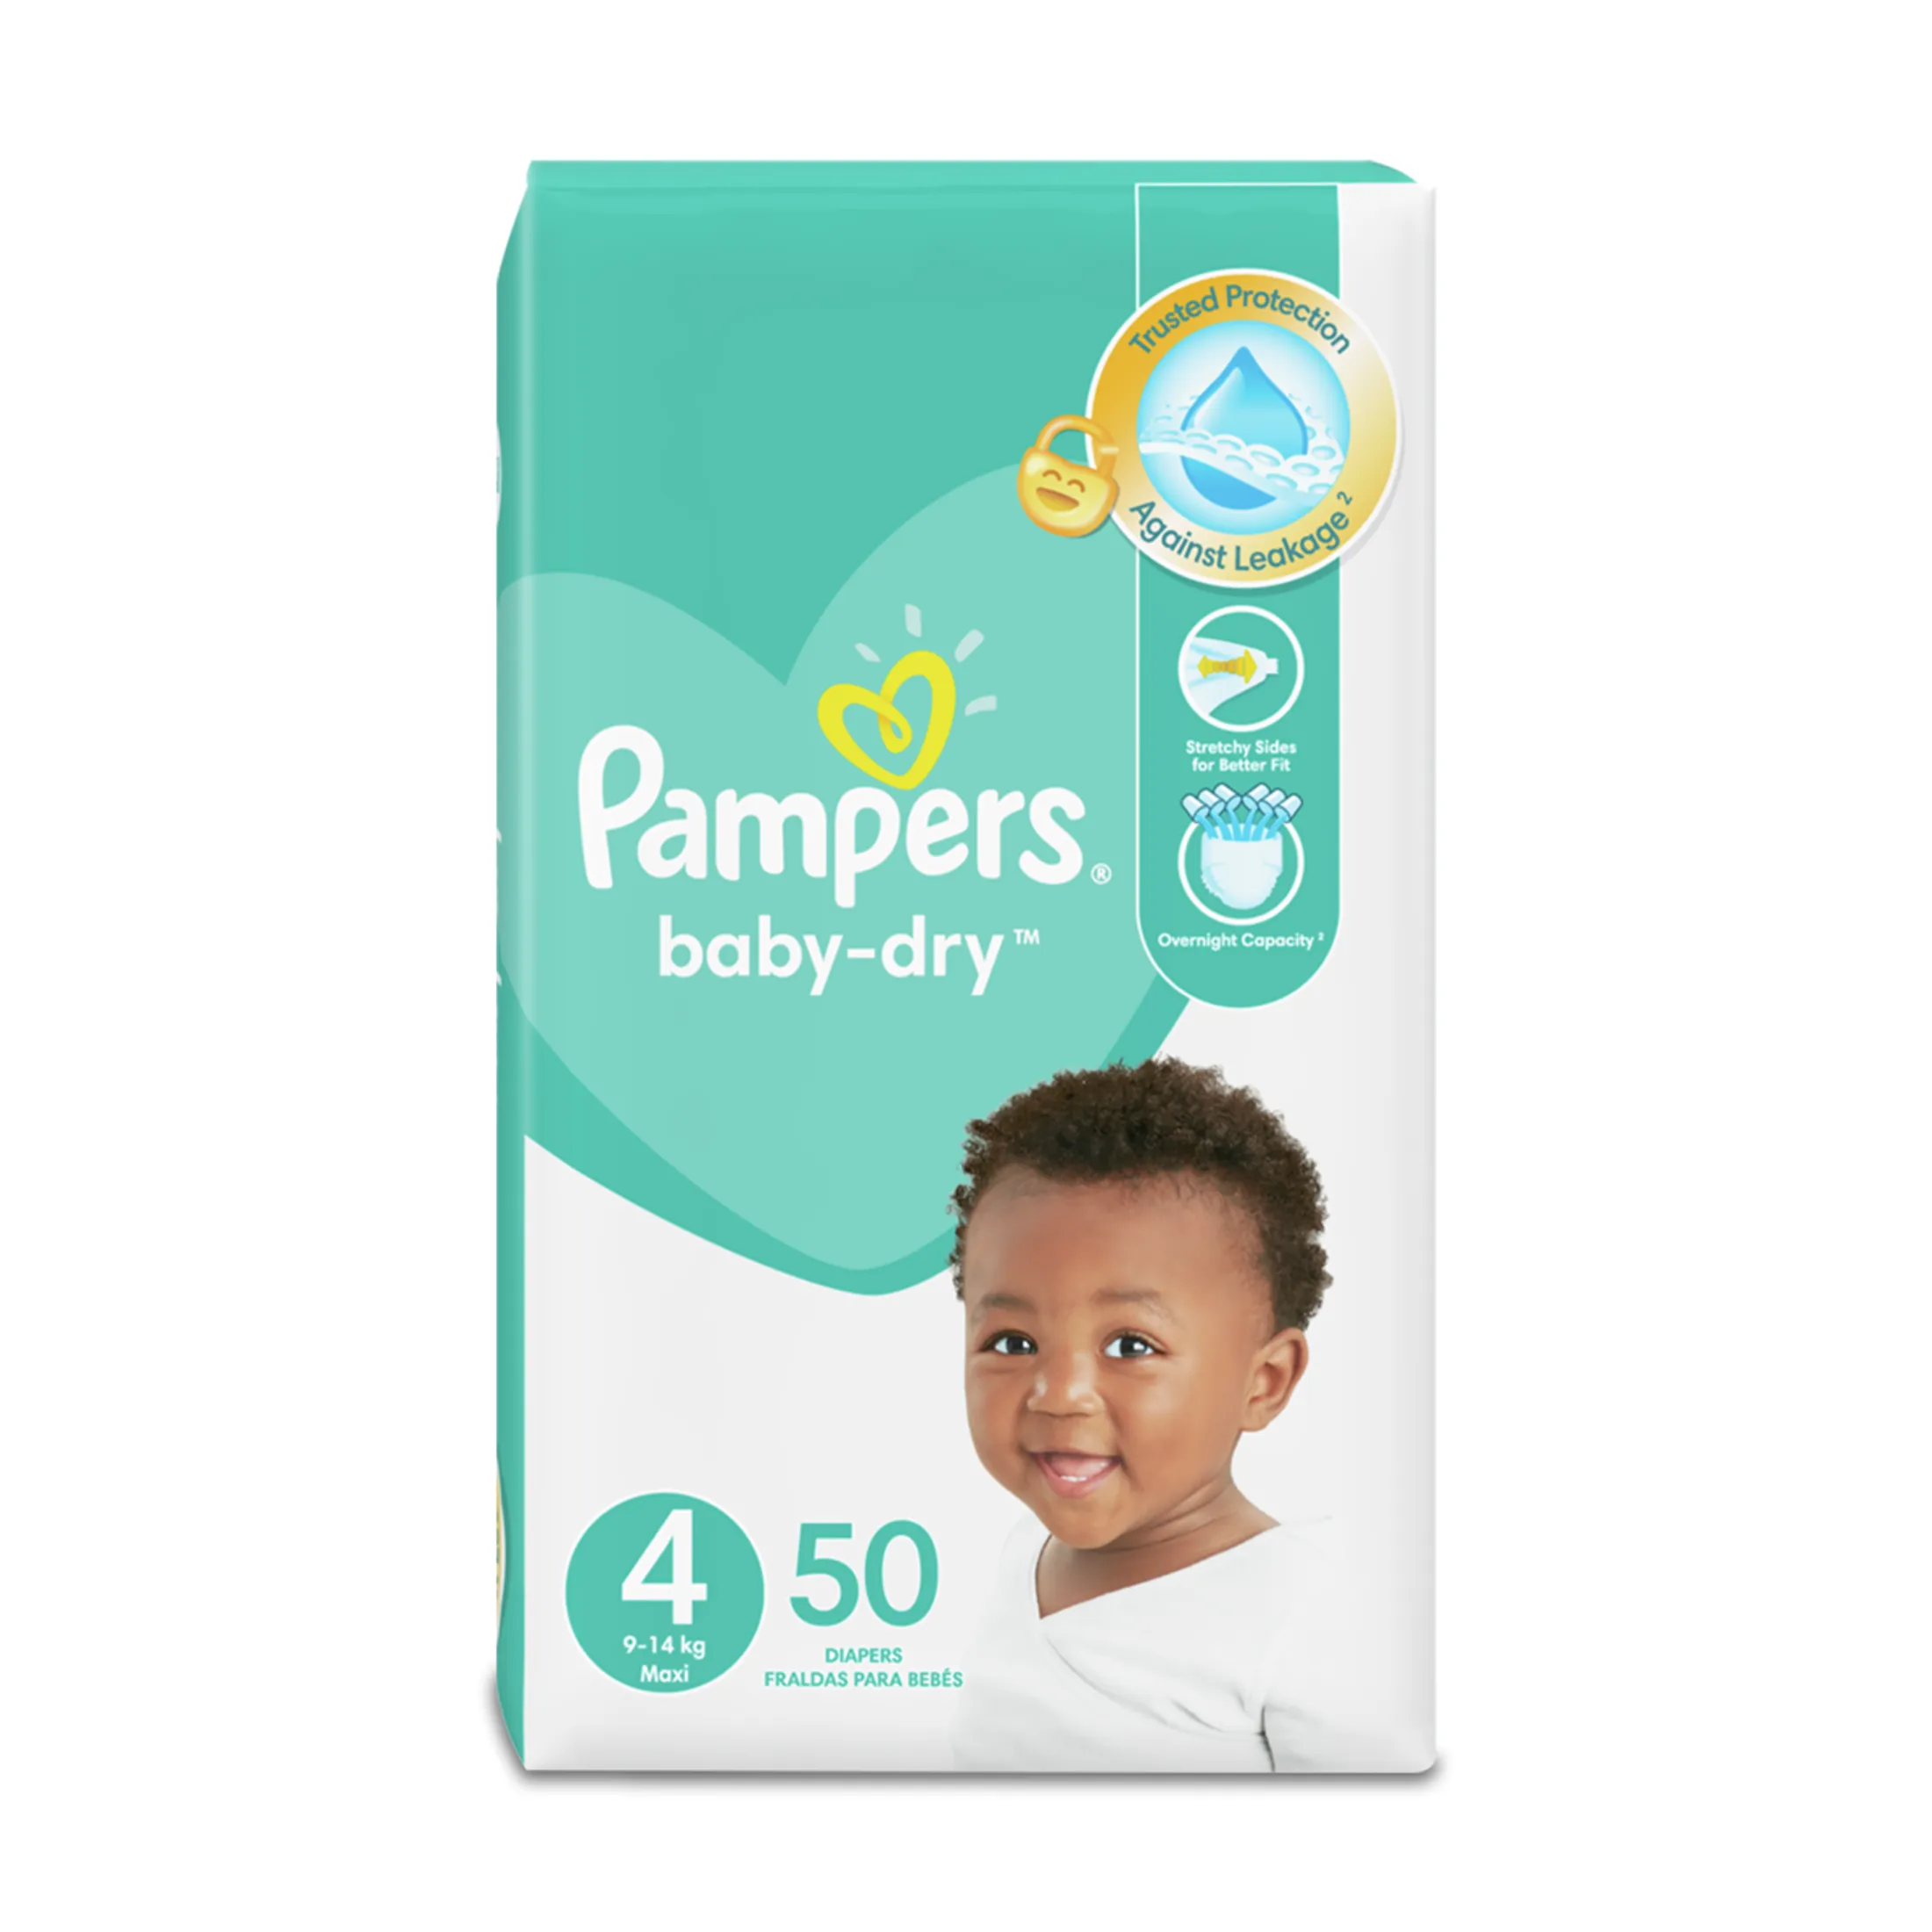 pampers active baby 4 maxi 132